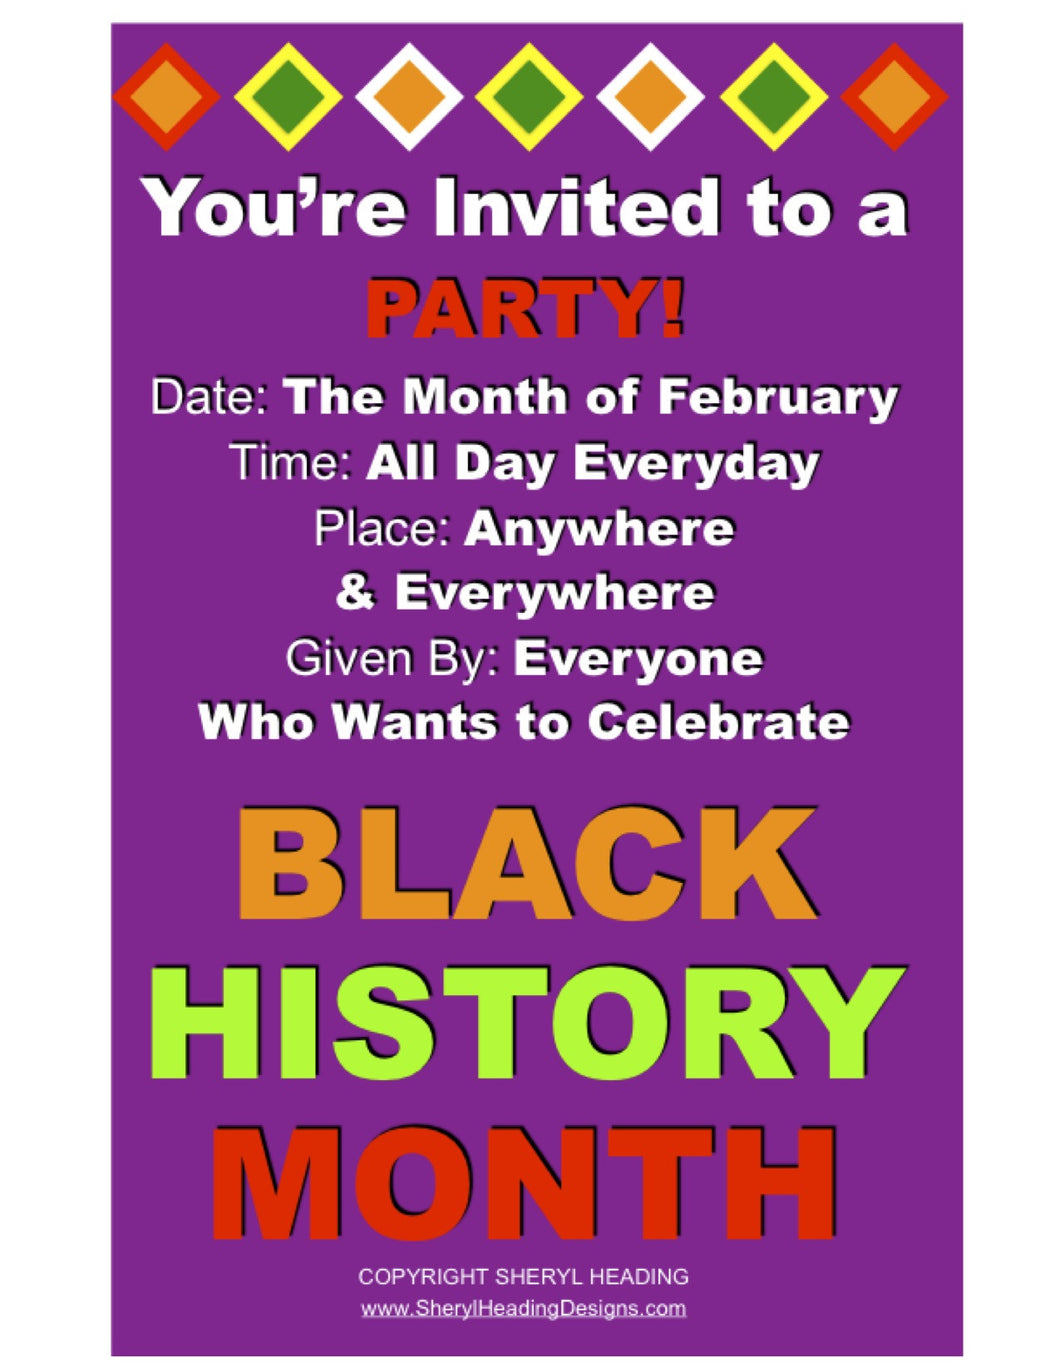 Black History Month You're Invited to a Party!  Plum, Gold Or Green Poster - Sheryl Heading Designs